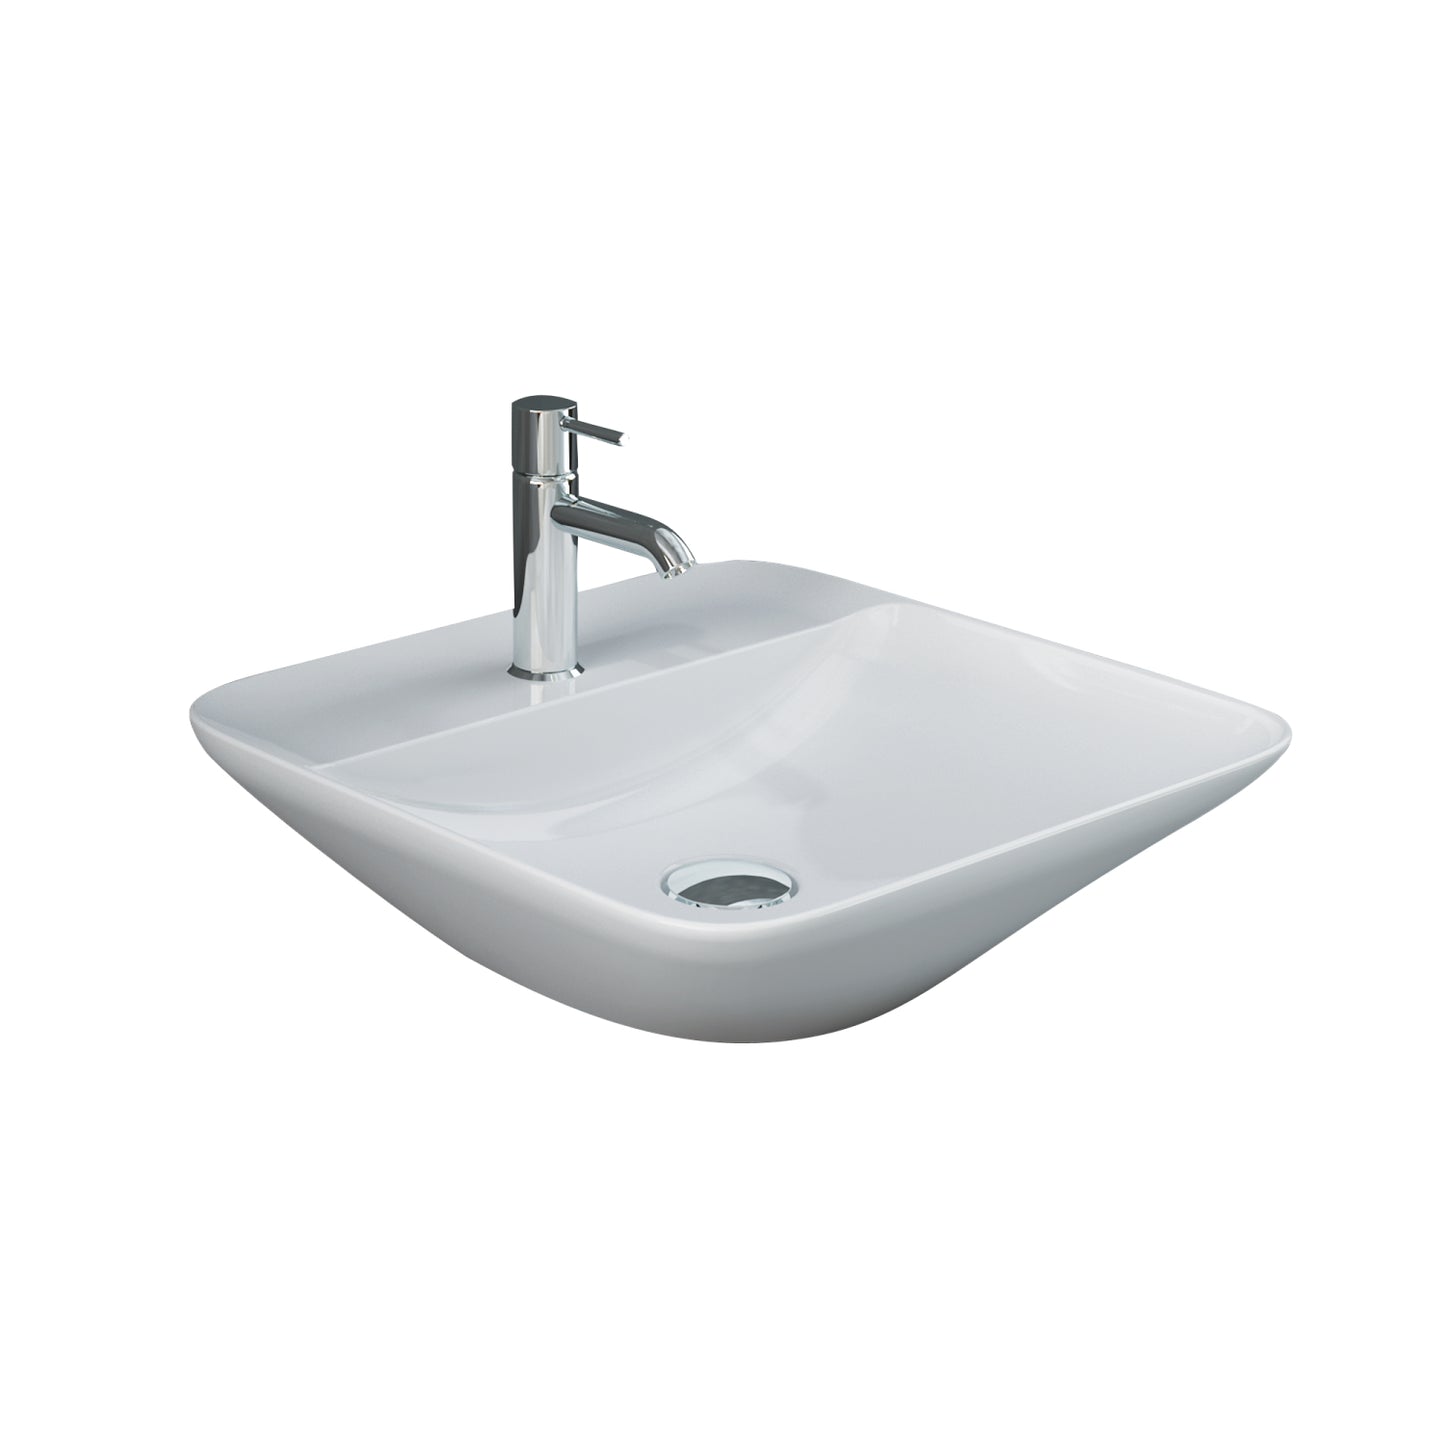 Variant 16 1/2" Square Vessel Basin Sink in White with 1 Faucet Hole